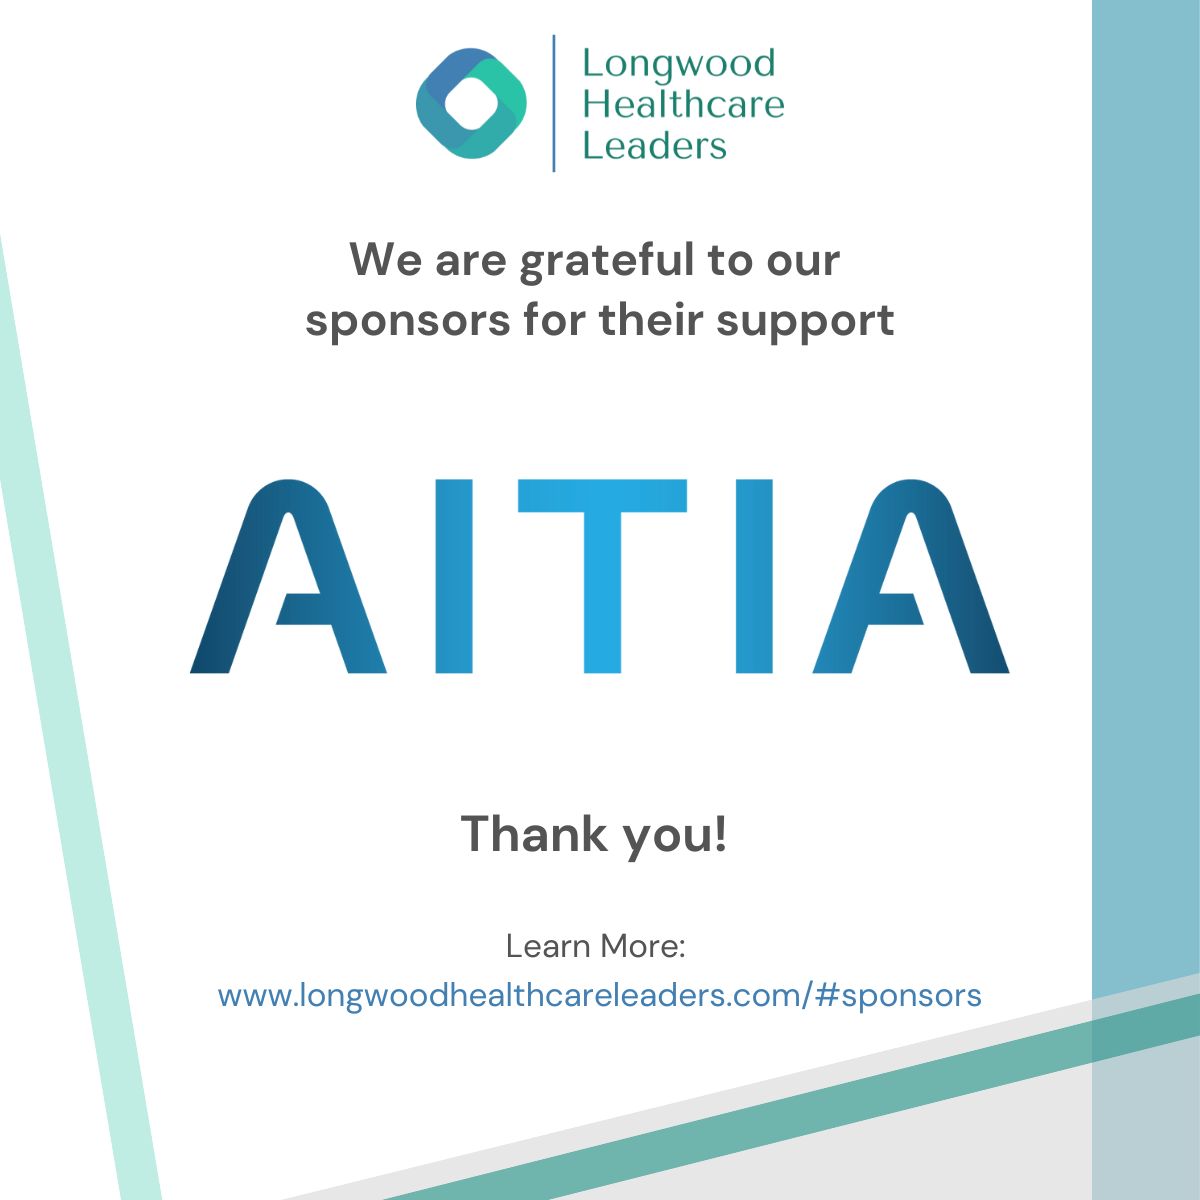 We are grateful to our sponsor @Aitiabio for their support of #LongwoodHealthcareLeaders. We’re thrilled to host @ColinHill1 as he leads a fireside chat at the meeting at the Fall conference.